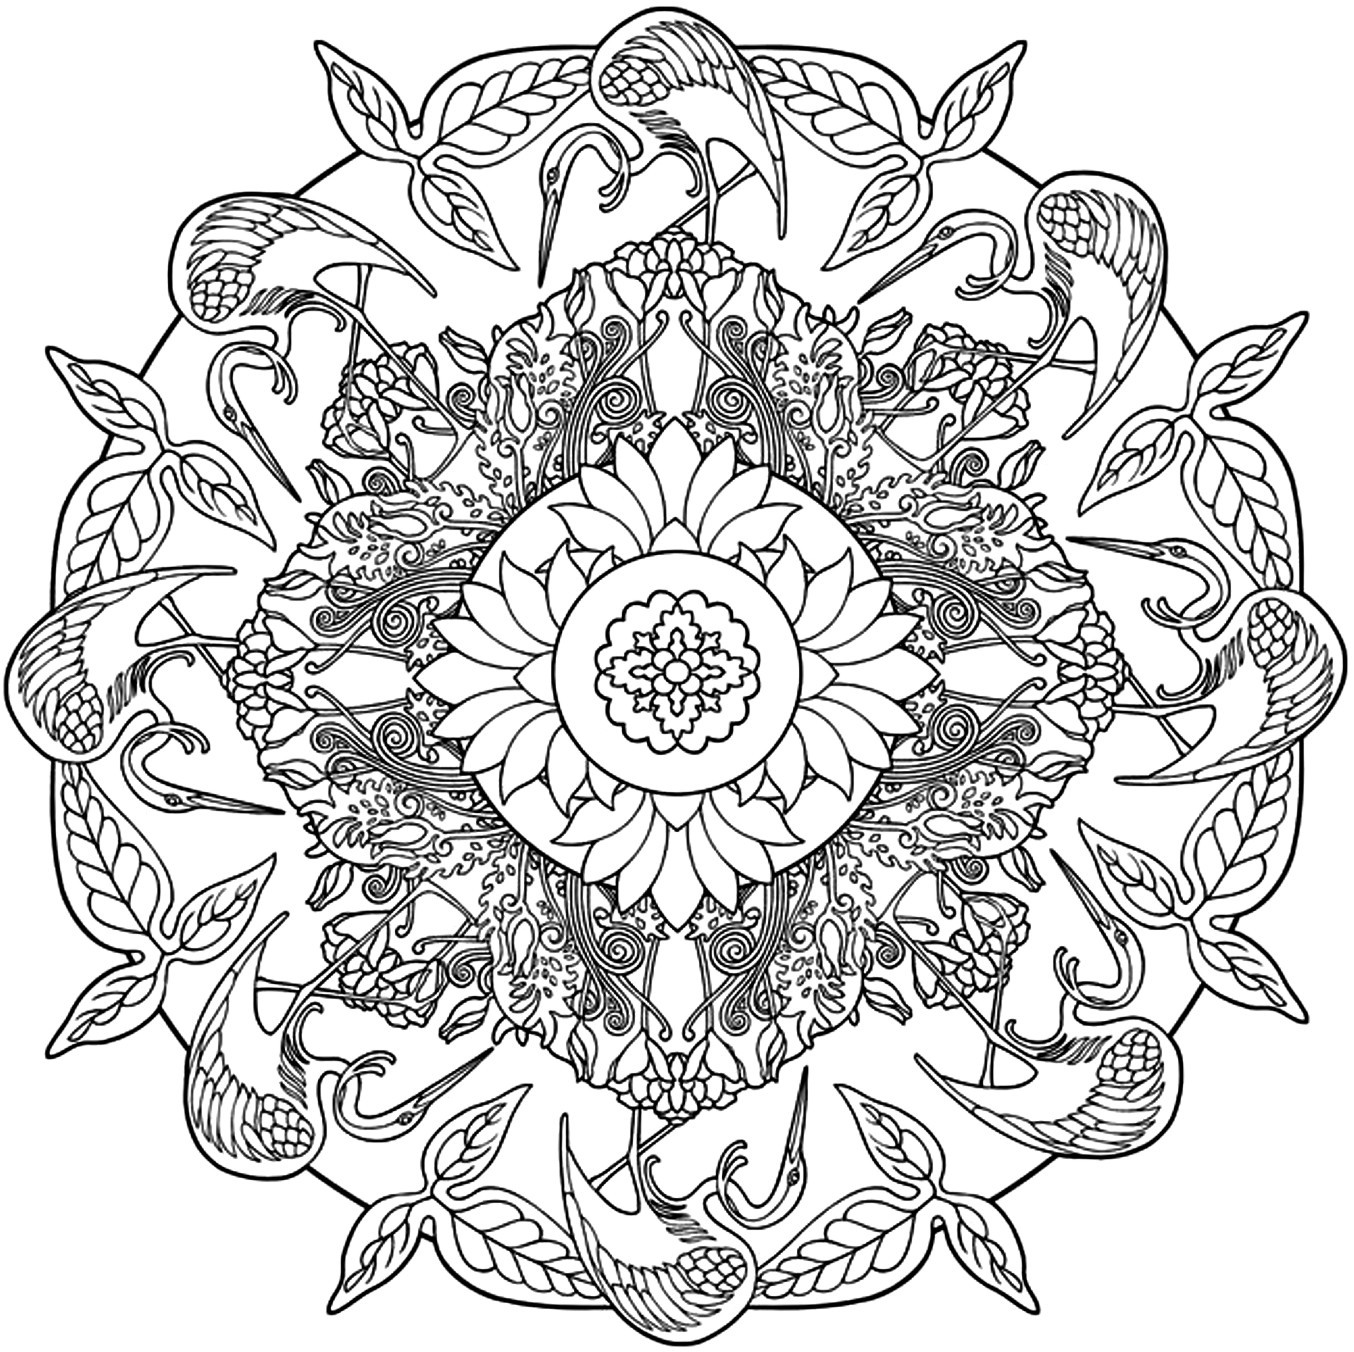 Free Mandala Coloring Pages For Adults
 Free Printable Adult Coloring Pages